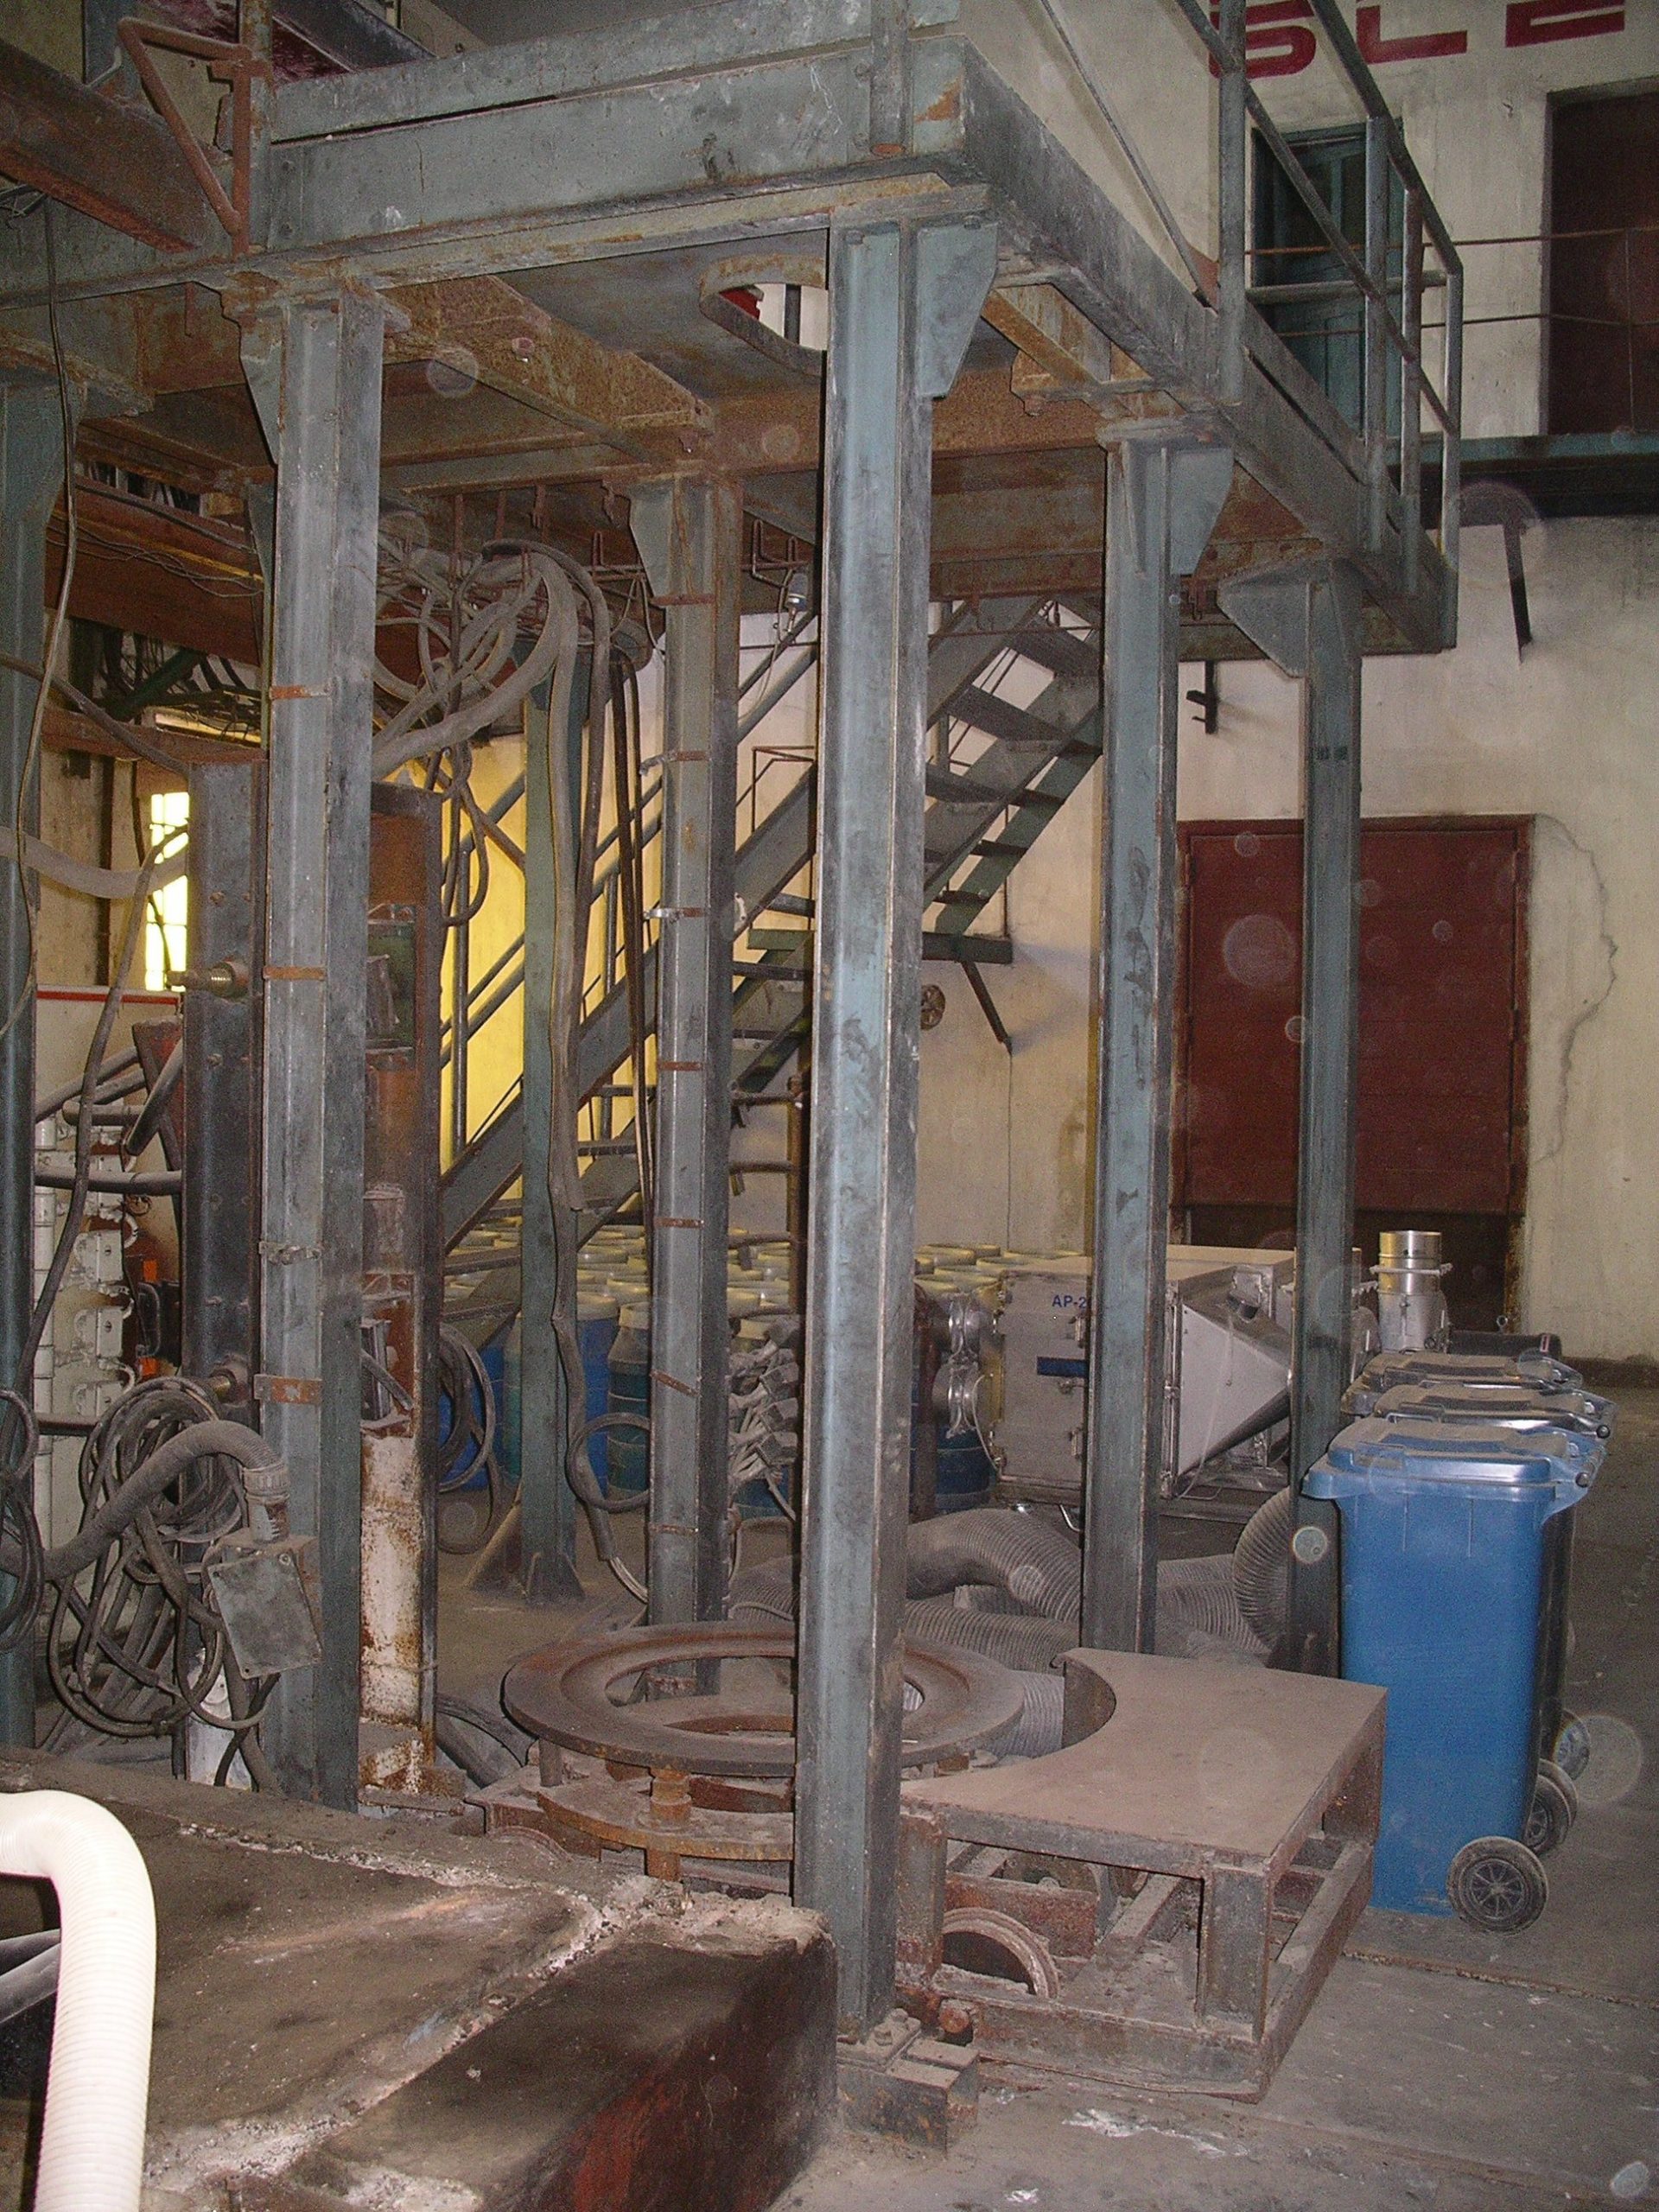 Five or more upright steel columns with metal stairs leading upward in the back and some tangled hoses and wires